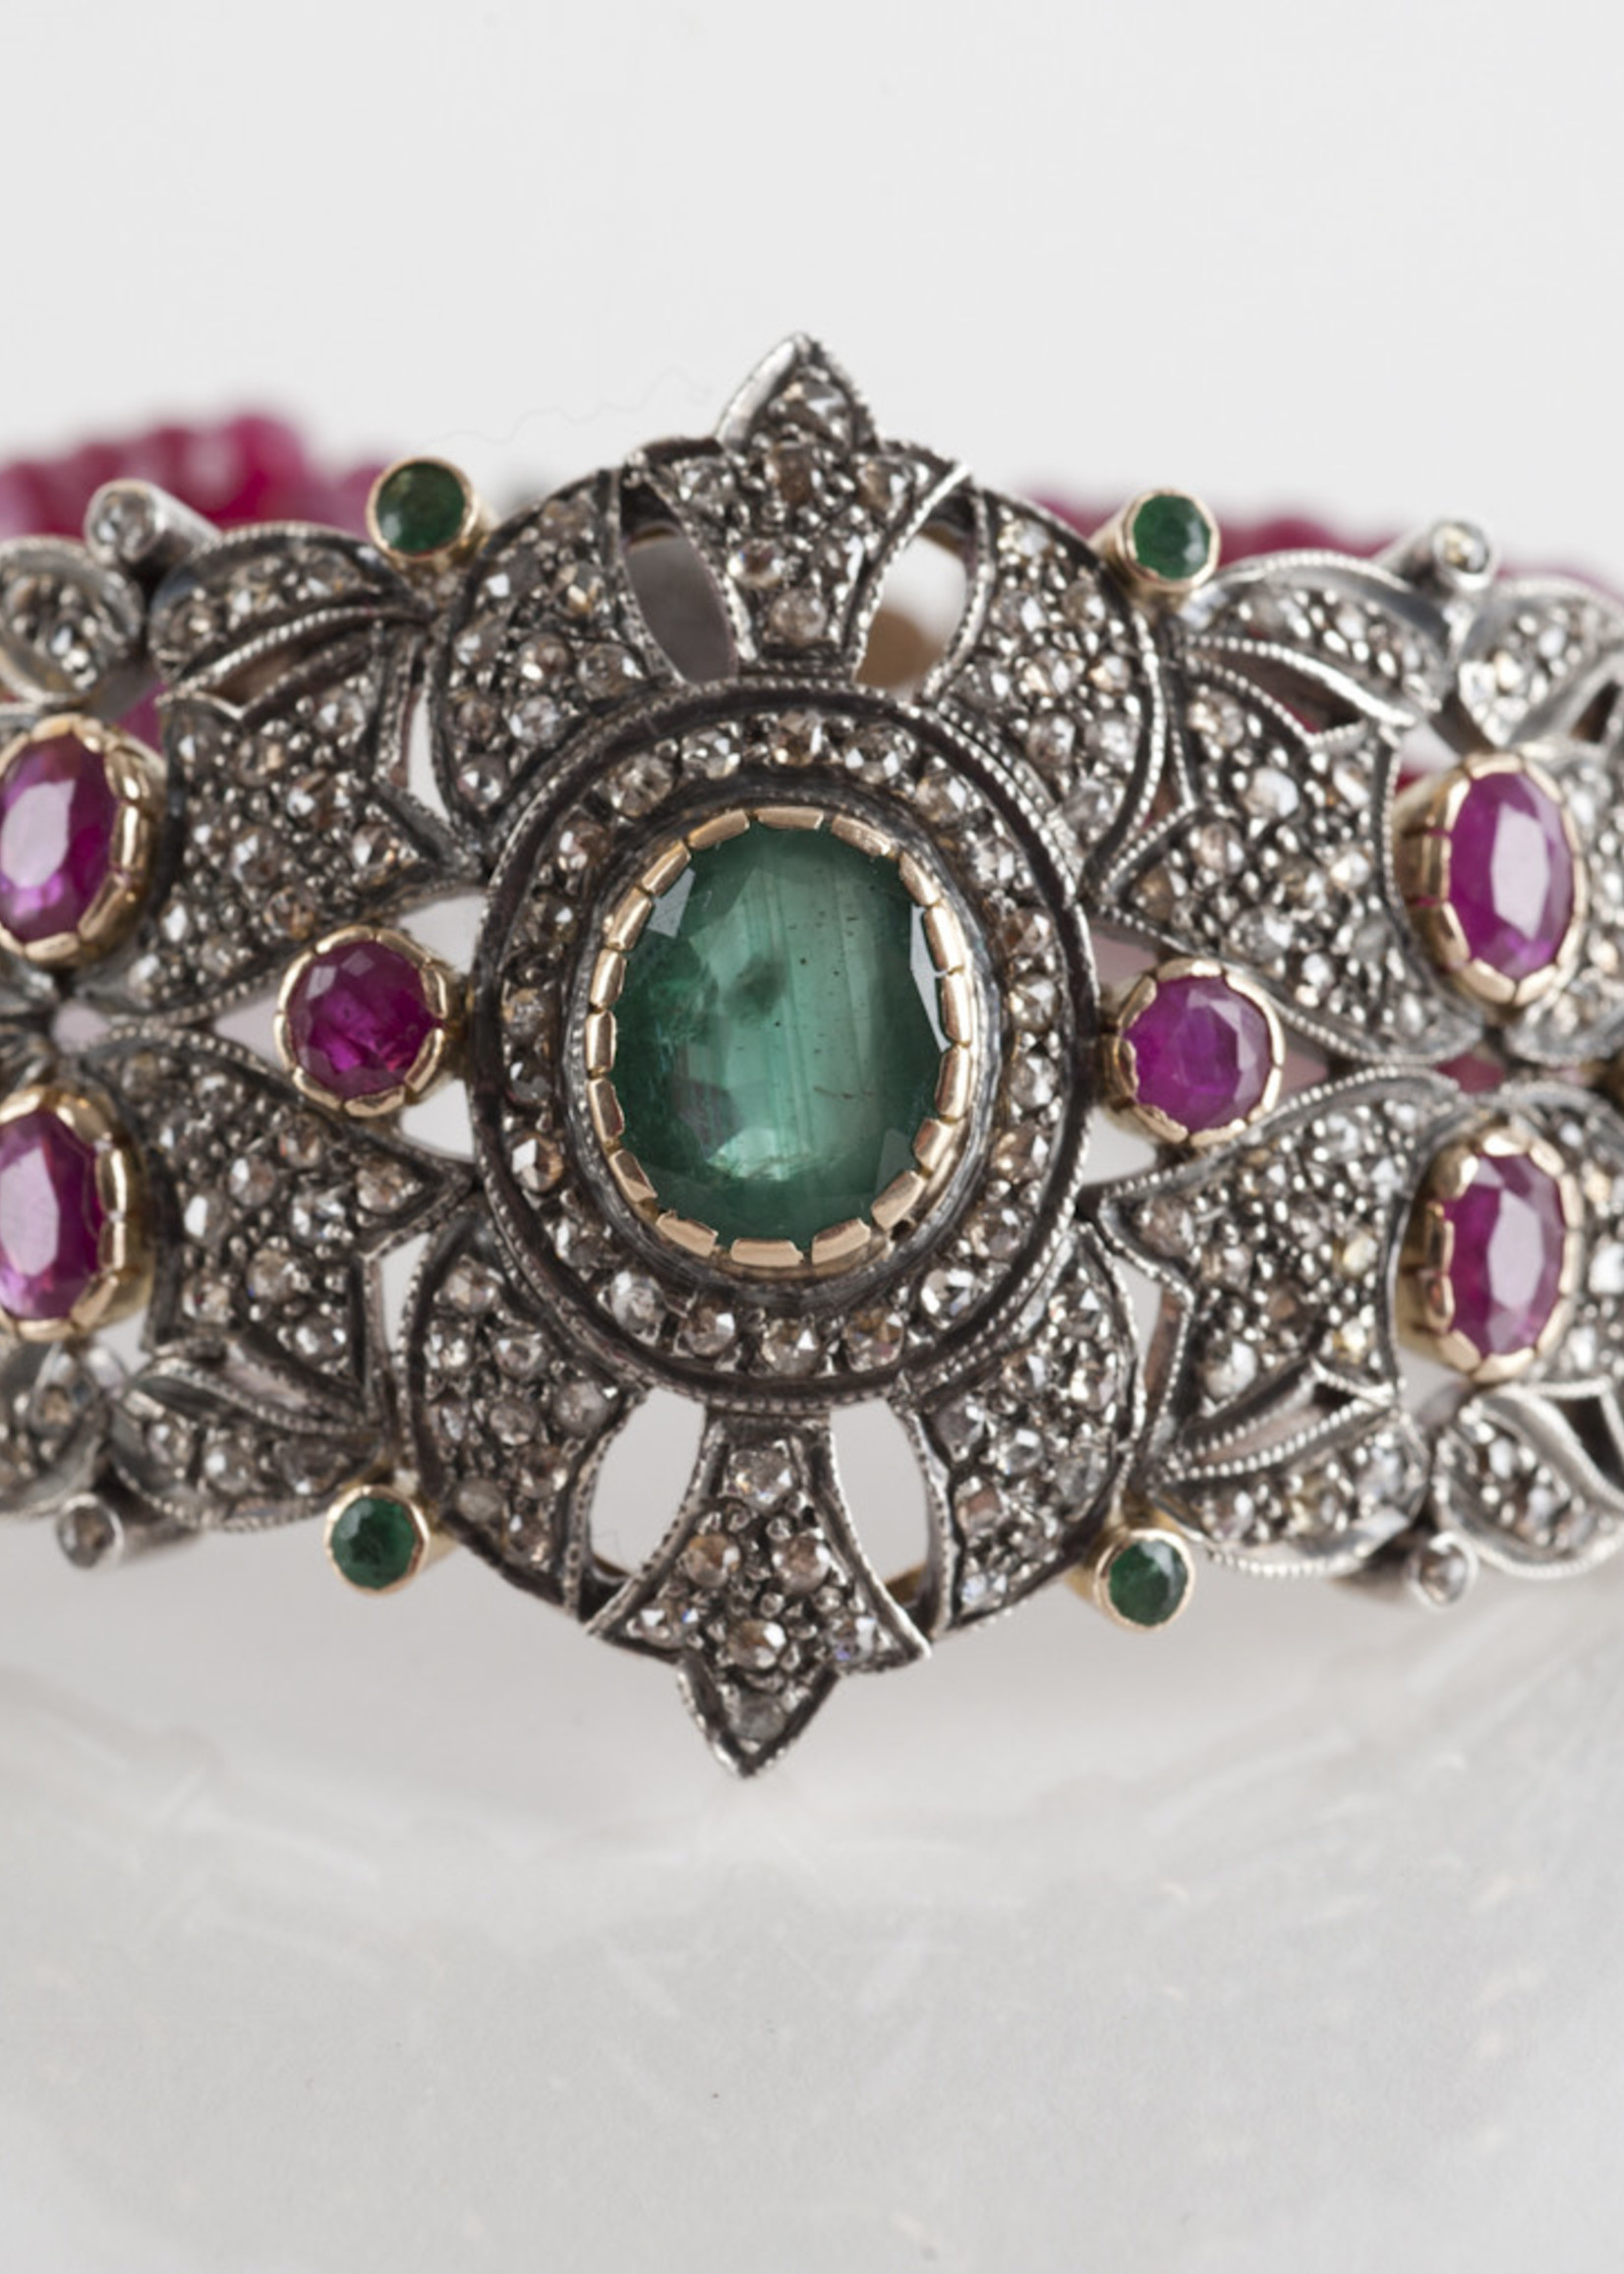 Mina Danielle One of a kind Ruby and Emerald Diamond Brooch Bracelet. Three rows of Ruby Gemstones are strung on each side of the Brooch and finished with a Beautiful Diamond Clasp. This piece can make any outfit.